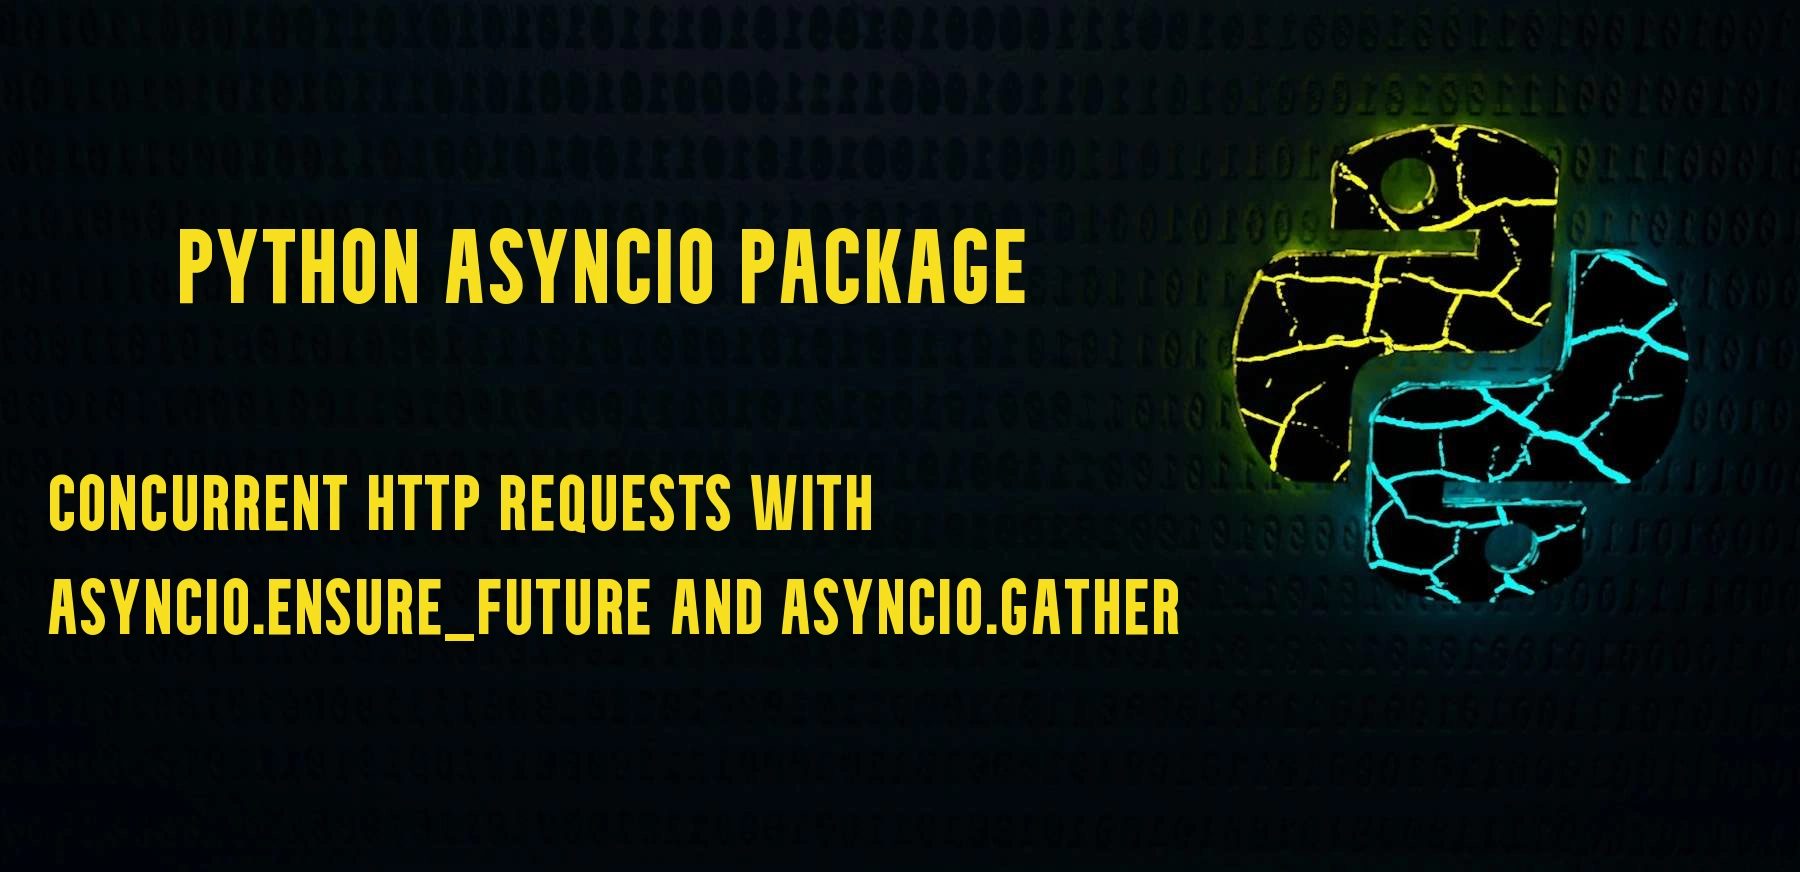 Cover Image for Using asyncio for concurrent http requests with Python (asyncio.ensure_future and asyncio.gather)